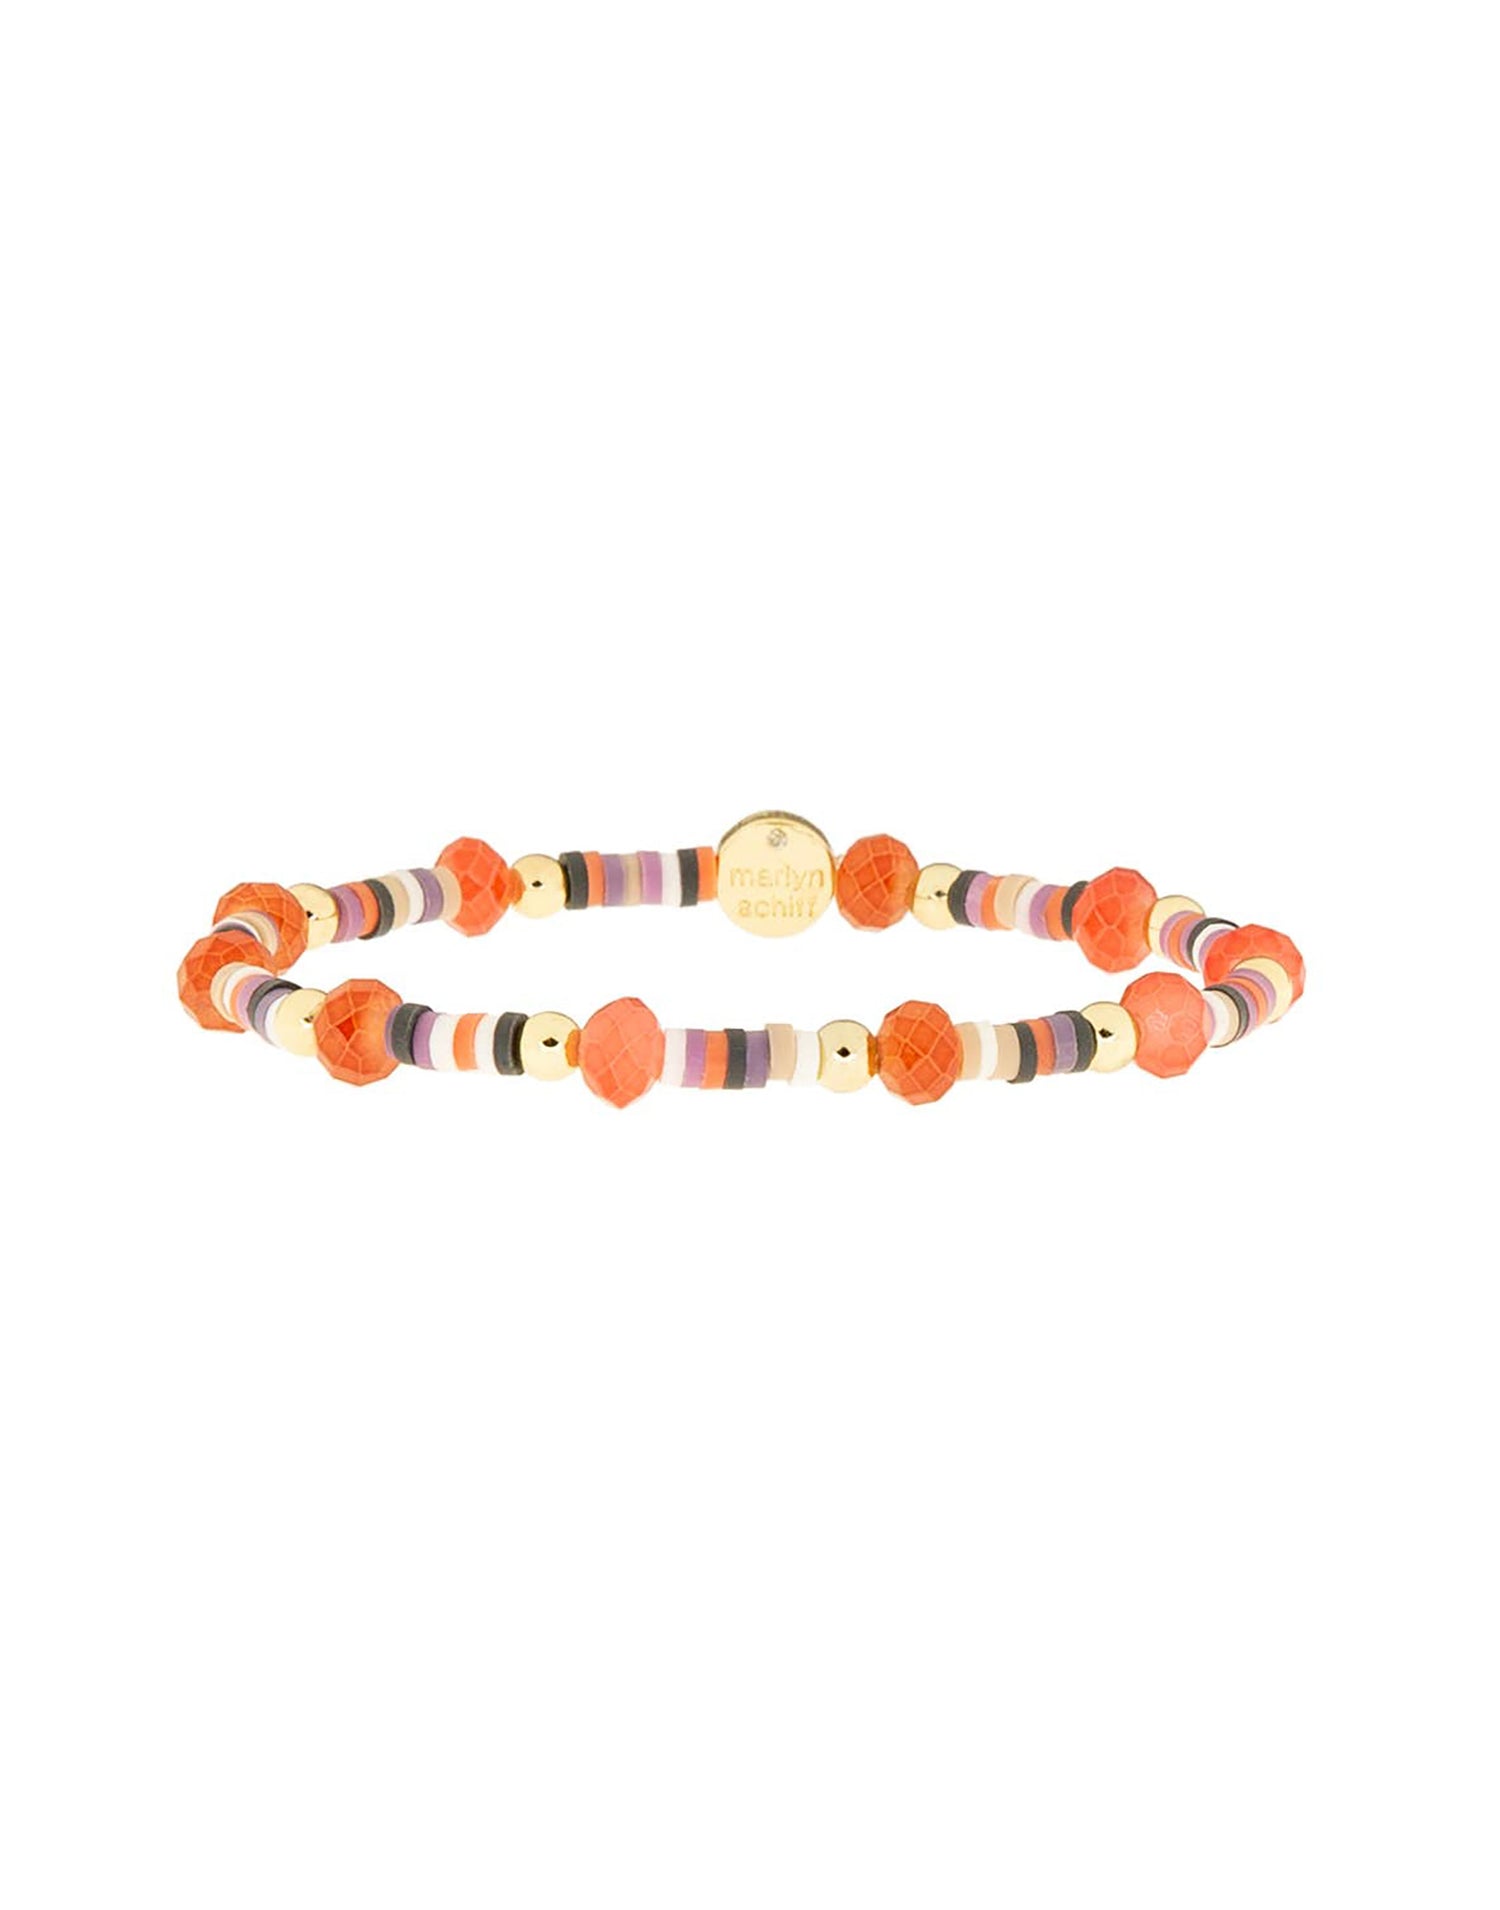 Heishi Crystal Bead Stretch Bracelet by Marlyn Schiff in Gold/Coral - Product View